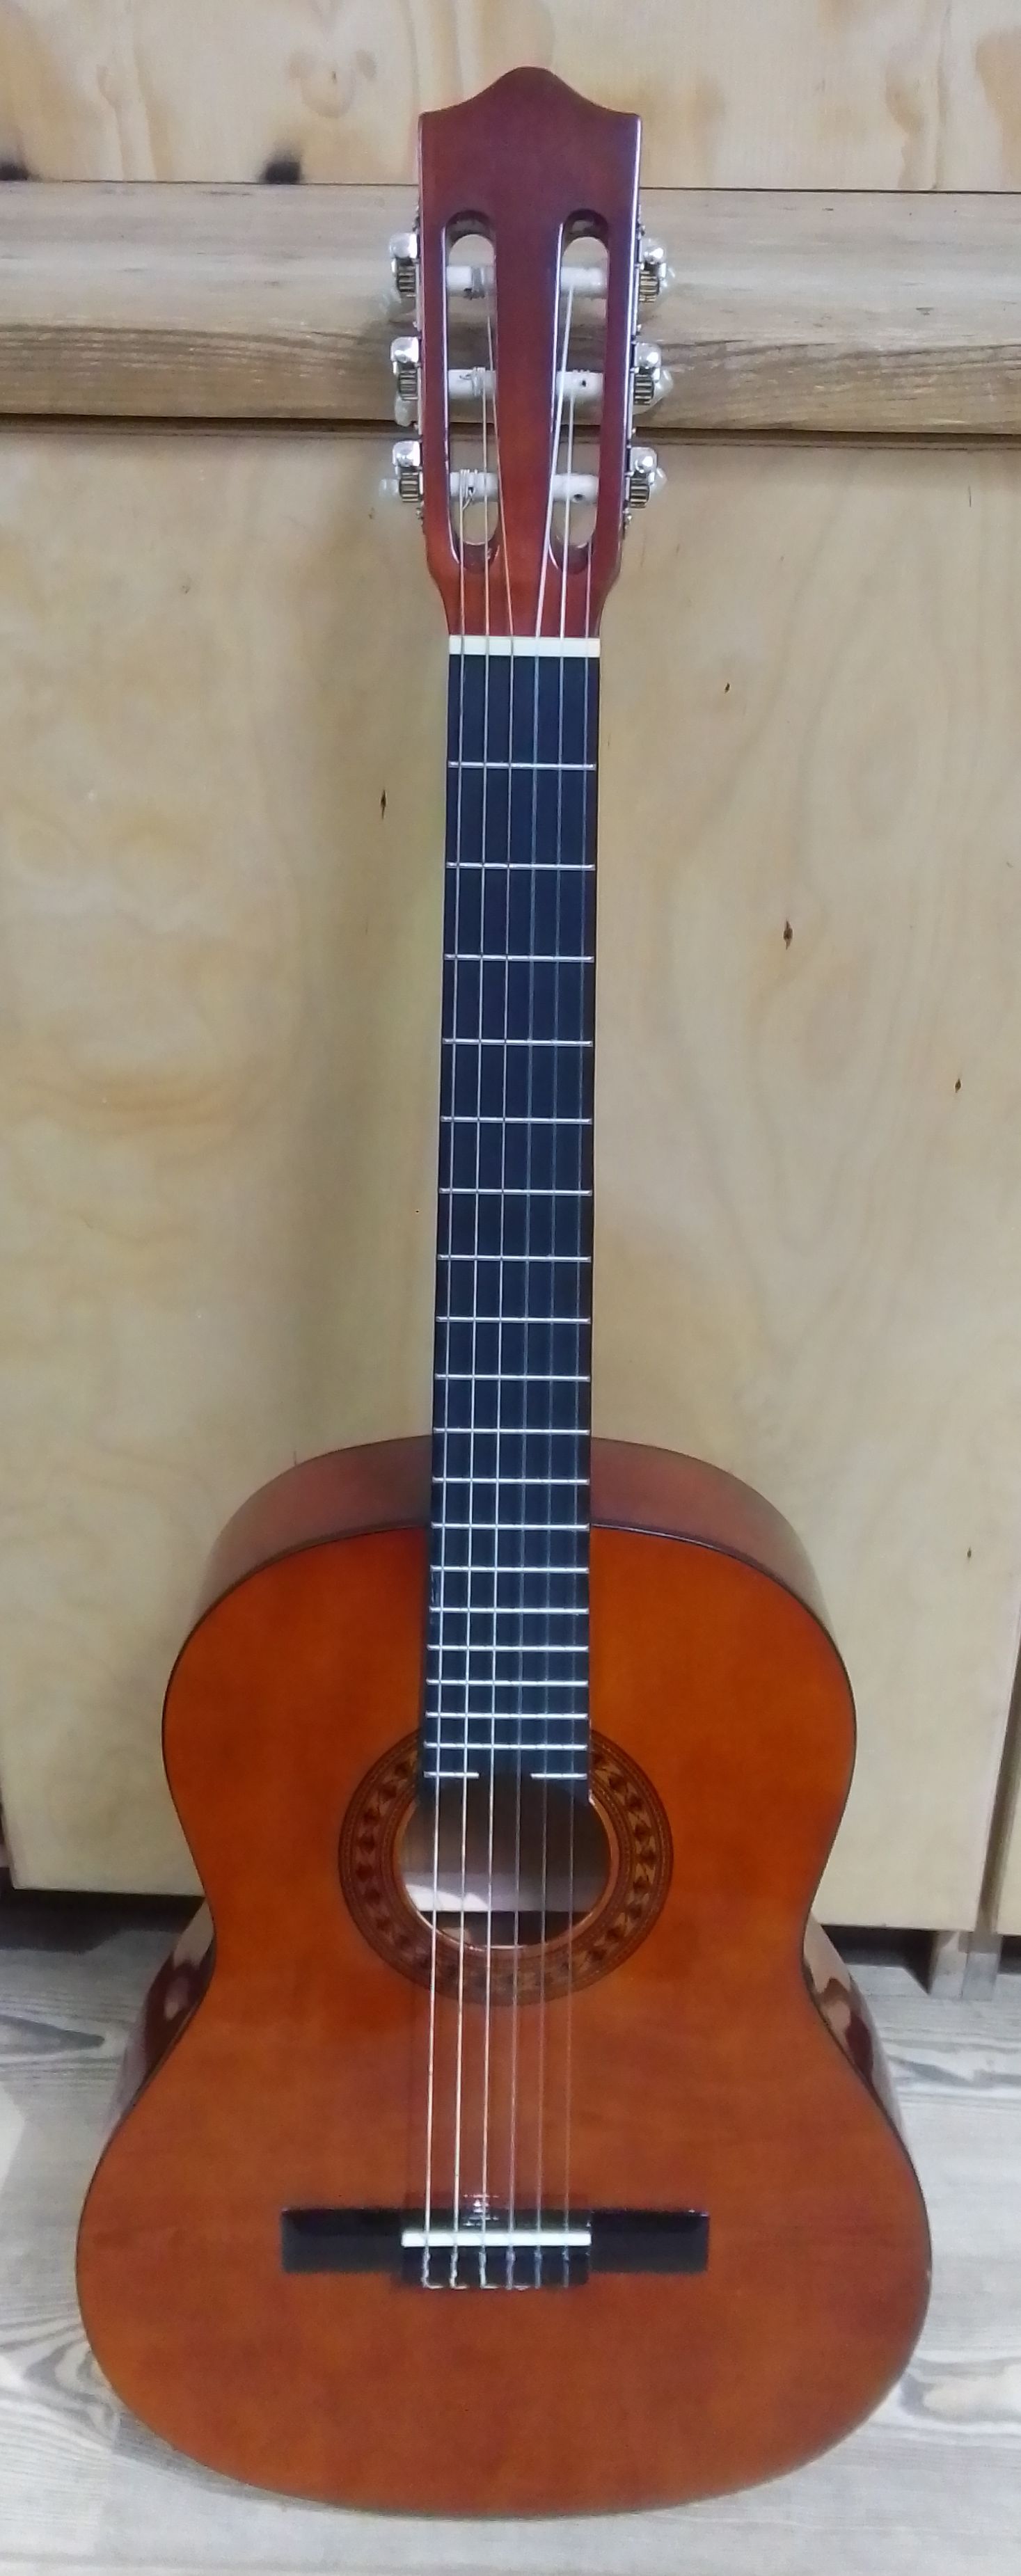 A Stagg nylon strung acoustic guitar.